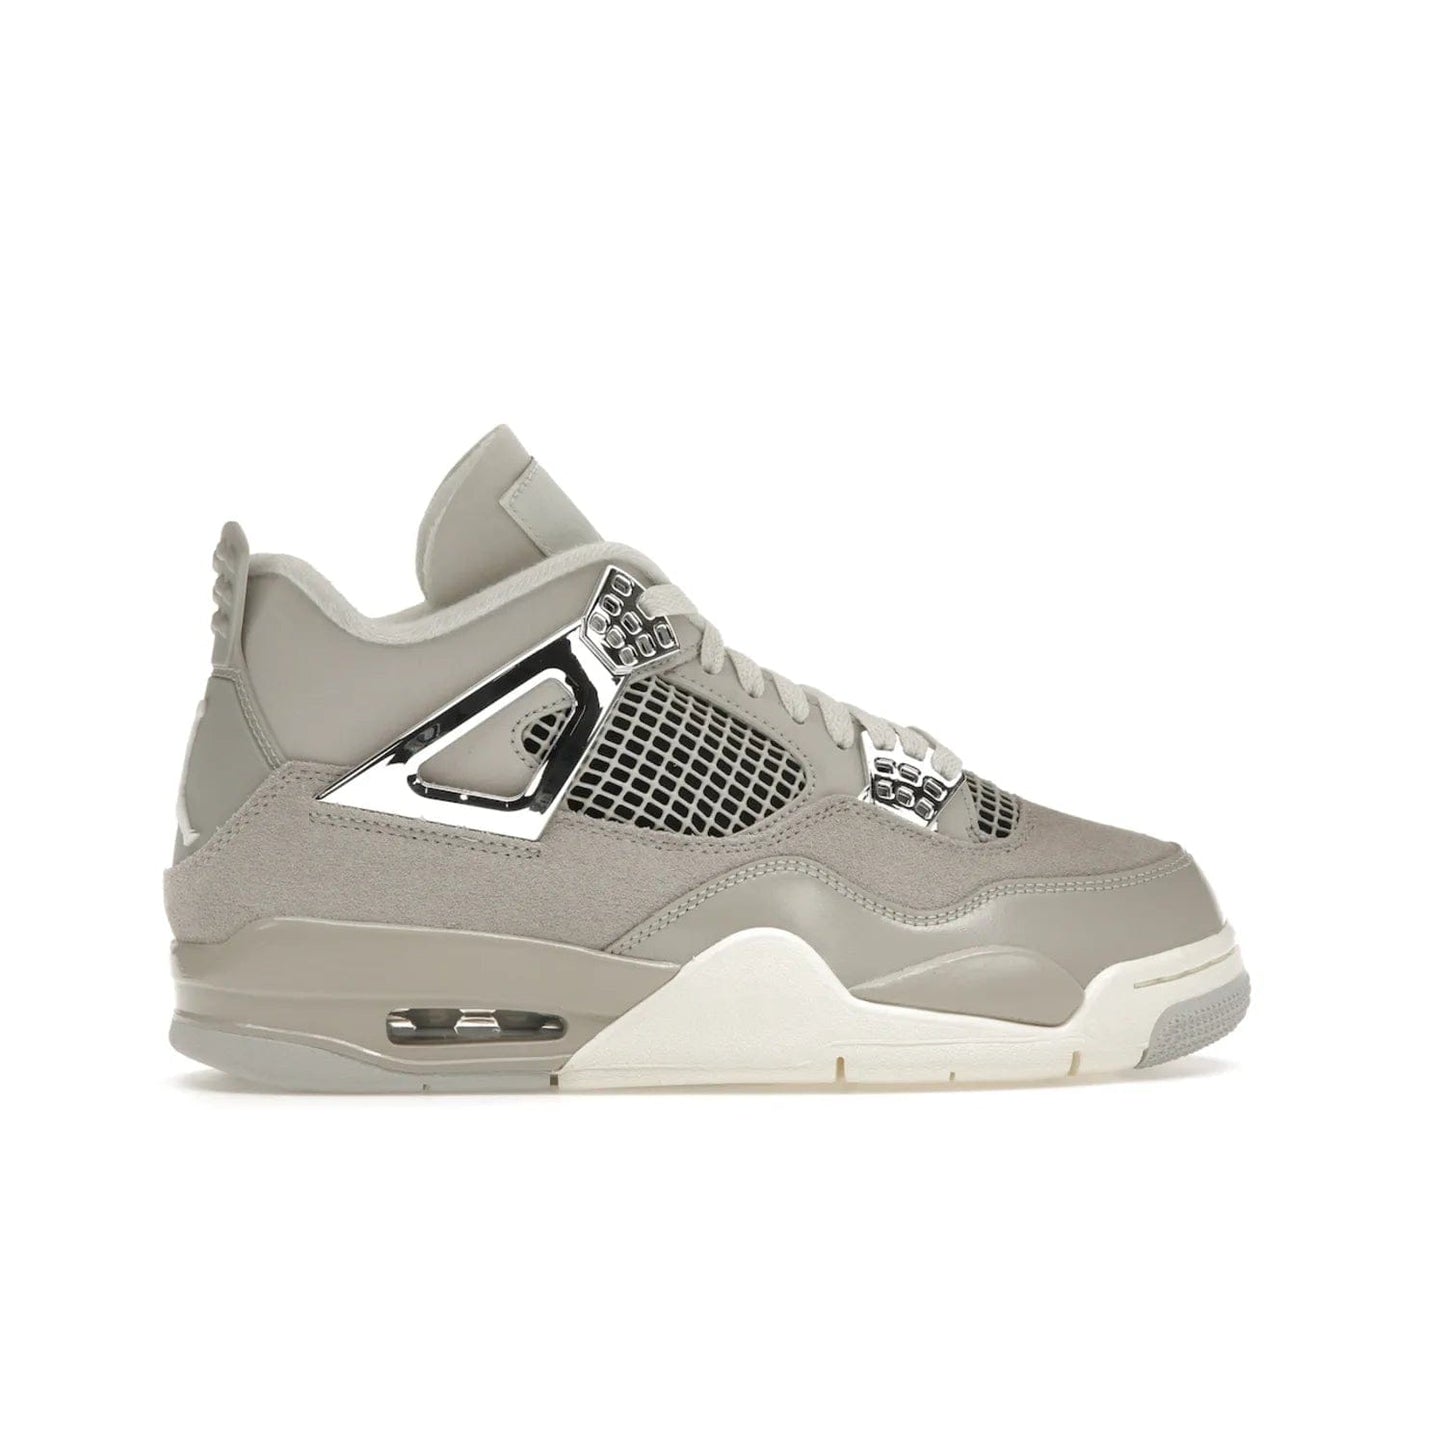 Jordan 4 Retro Frozen Moments (Women's) - Image 36 - Only at www.BallersClubKickz.com - The Jordan 4 Retro Frozen Moments is a stylish blend of classic design elements and modern tones. Featuring suede and leather overlays in a light iron-ore, sail, neutral grey, black, and metallic silver colorway. Get this iconic high-performance sneaker for $210.